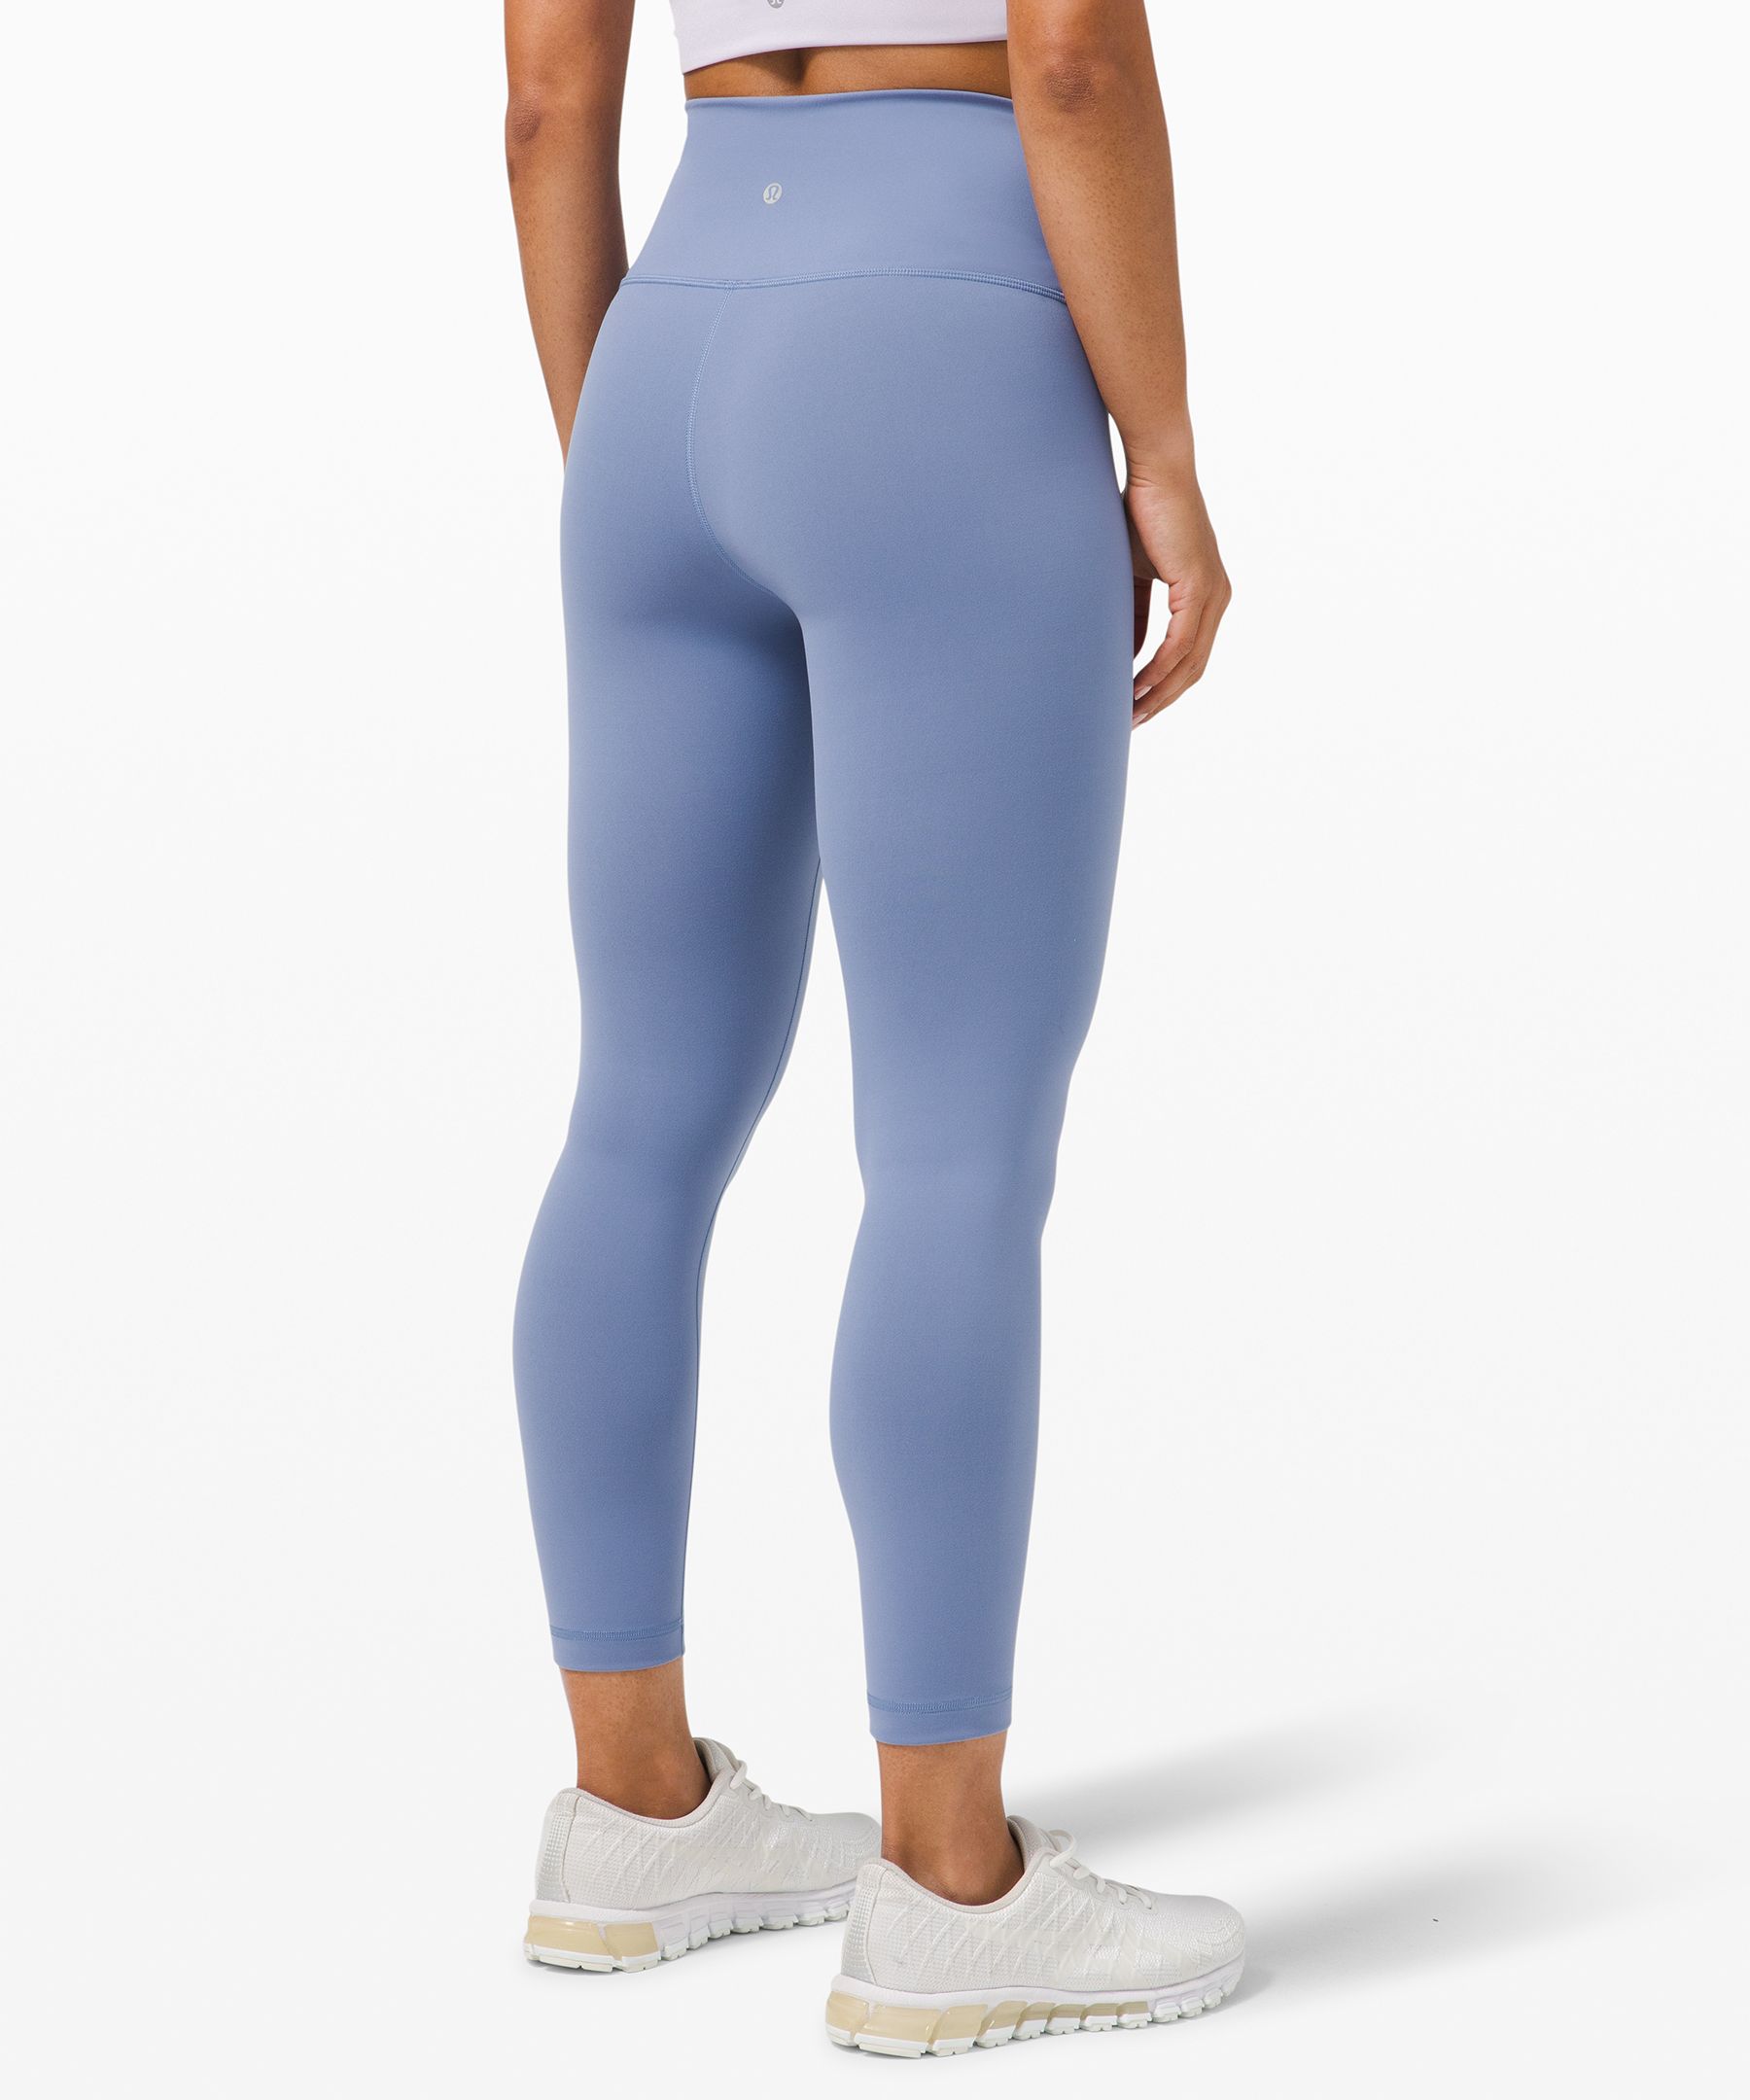 Lululemon Everlux Review: Wunder Train Tights - Agent Athletica